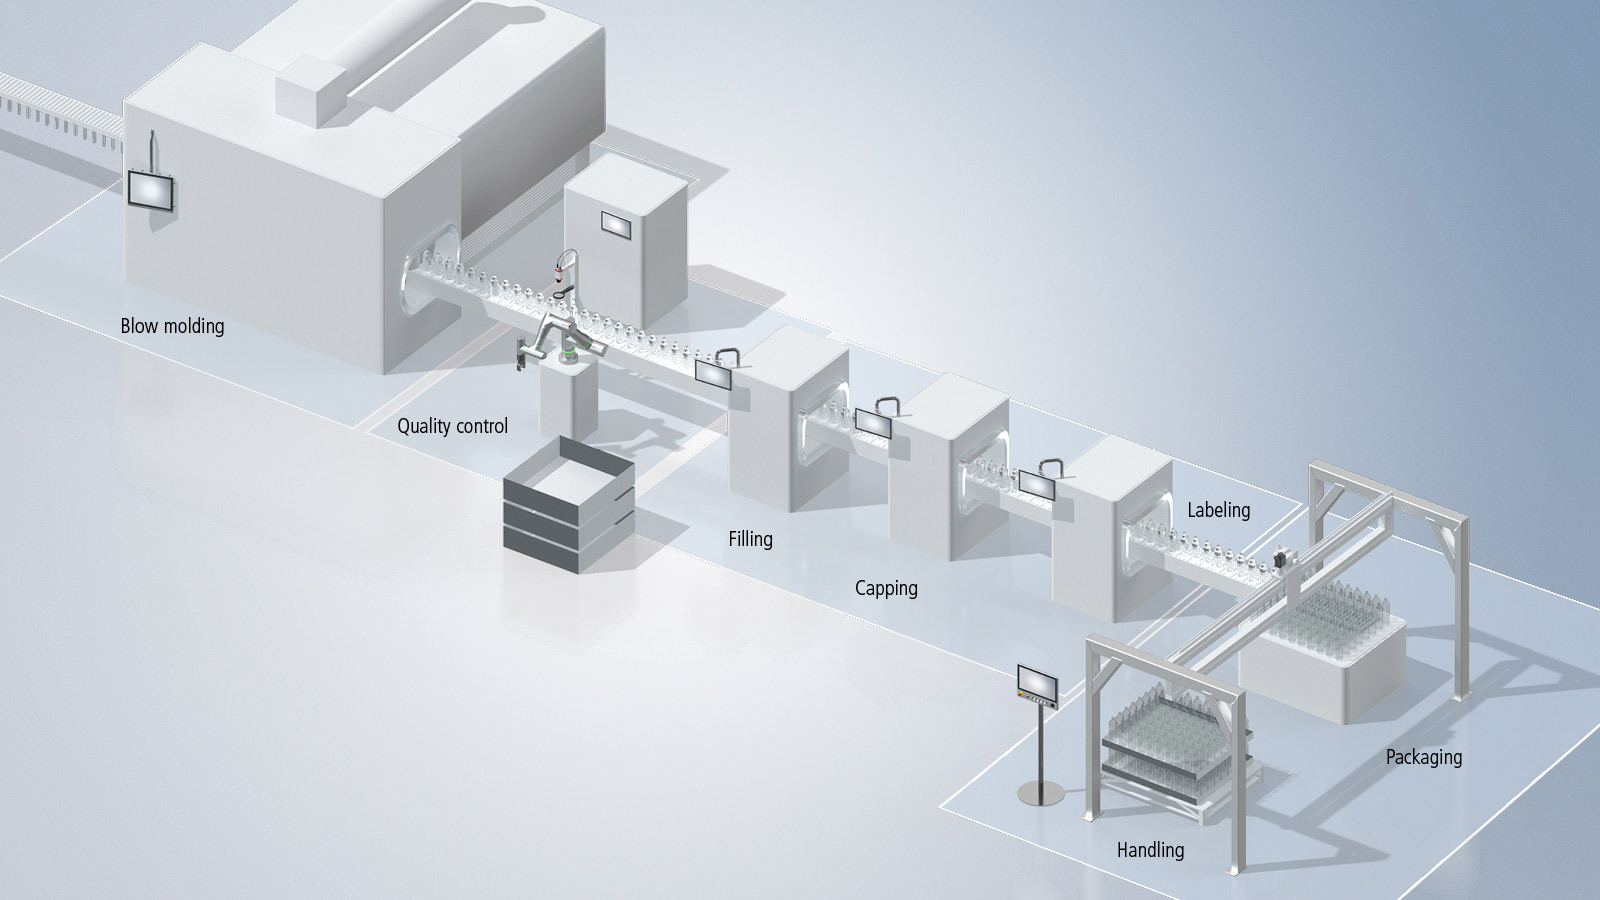 The optimal efficiency of processes on the complex journey from raw material through to final packaging relies on the close integration of automation technology between plastics and packaging machinery.